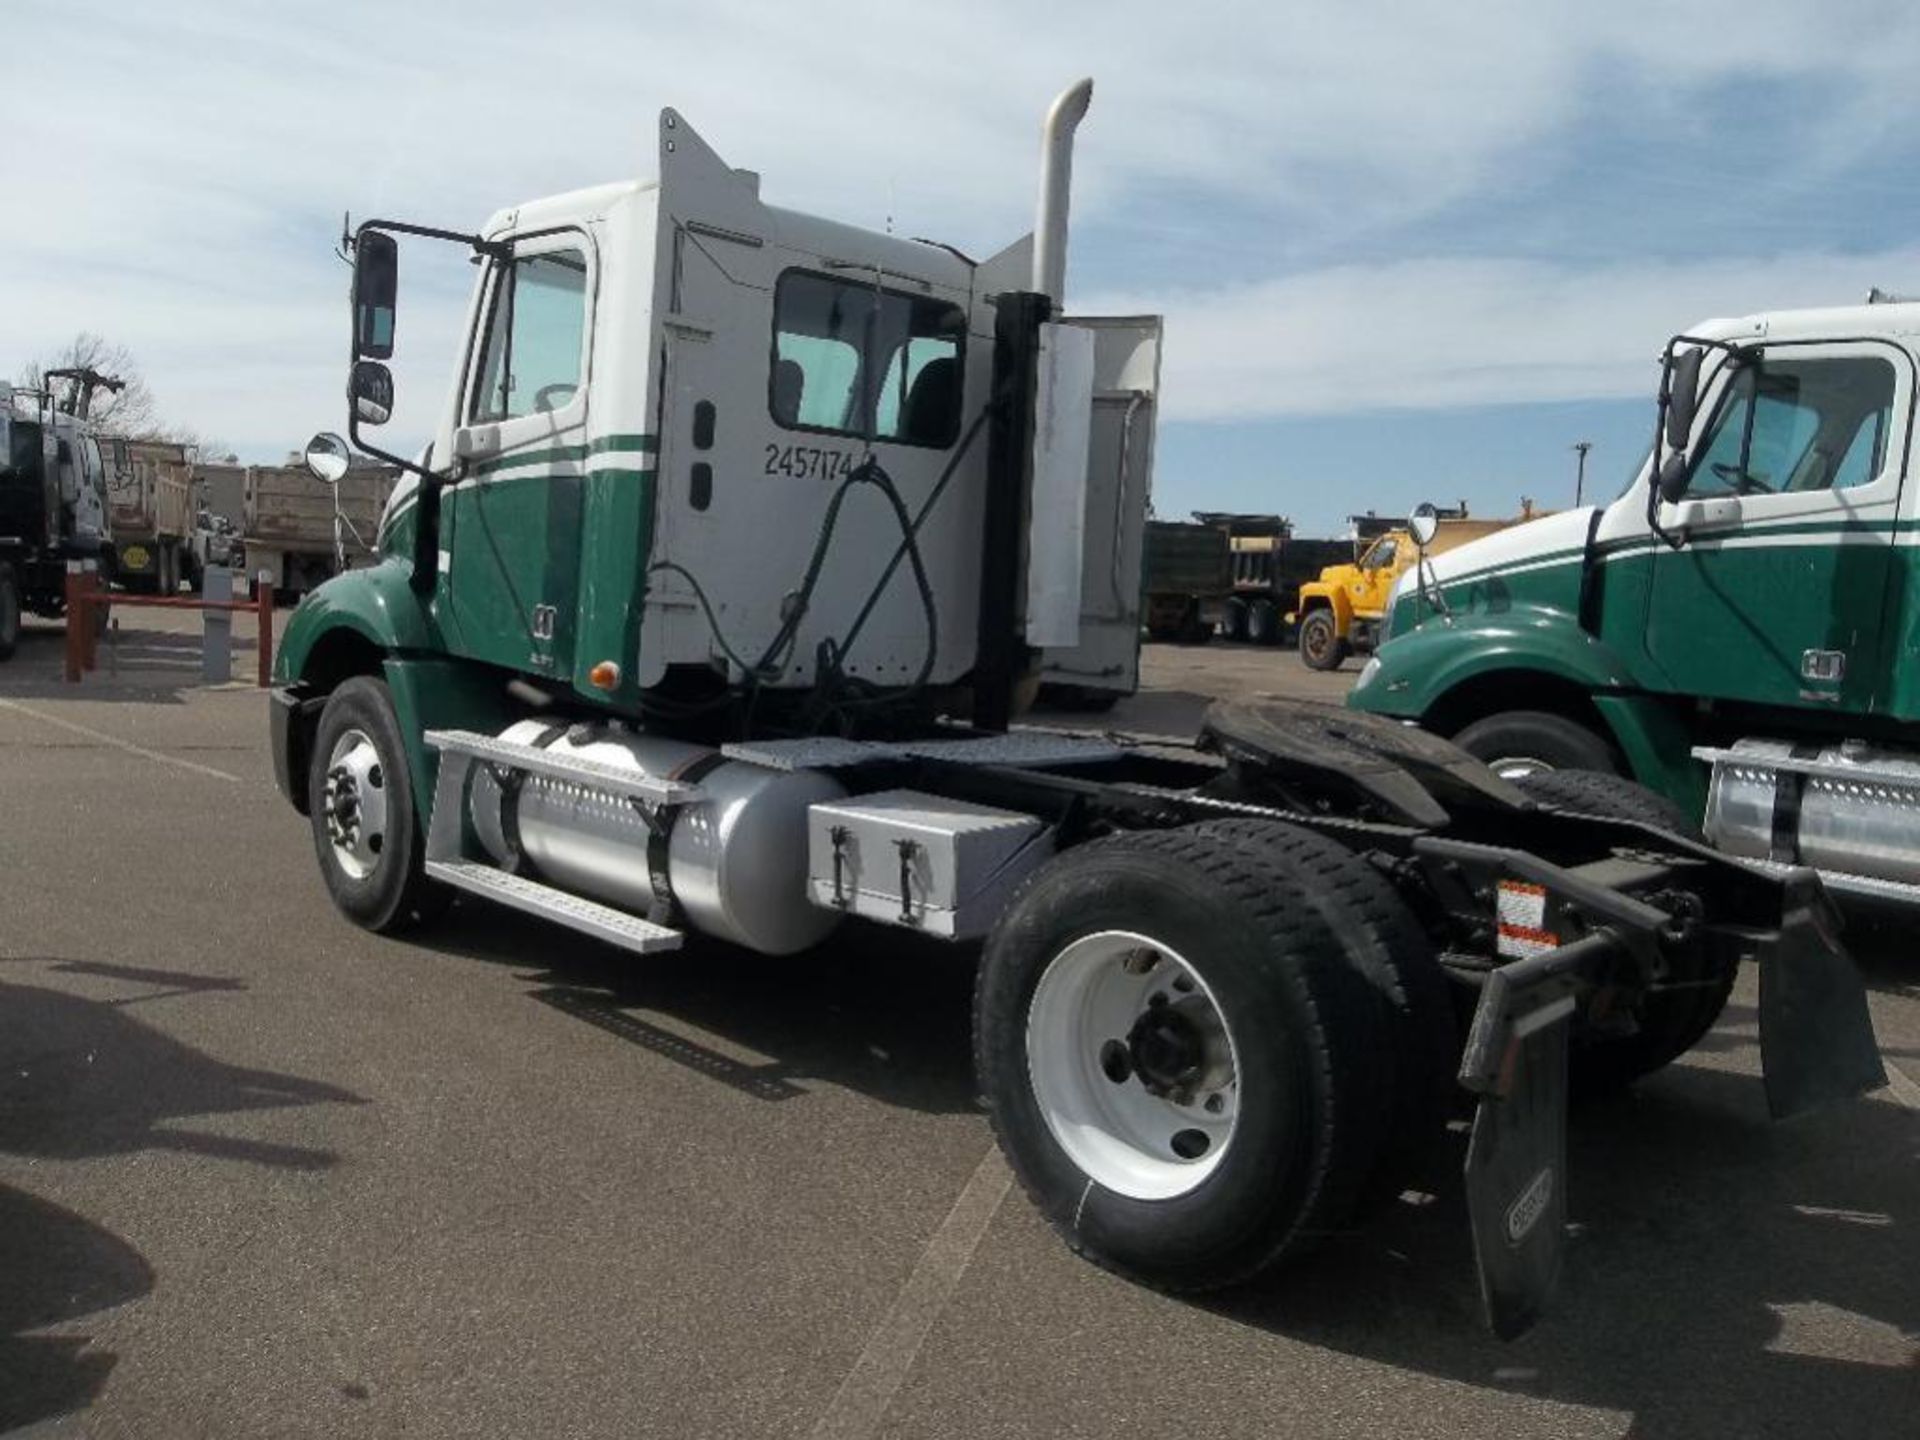 2006 Freightliner s/a Truck Tractor s/n 1fubf9de57lw70940, cat c13 eng, 10 spd trans, a/r , od reads - Image 4 of 6